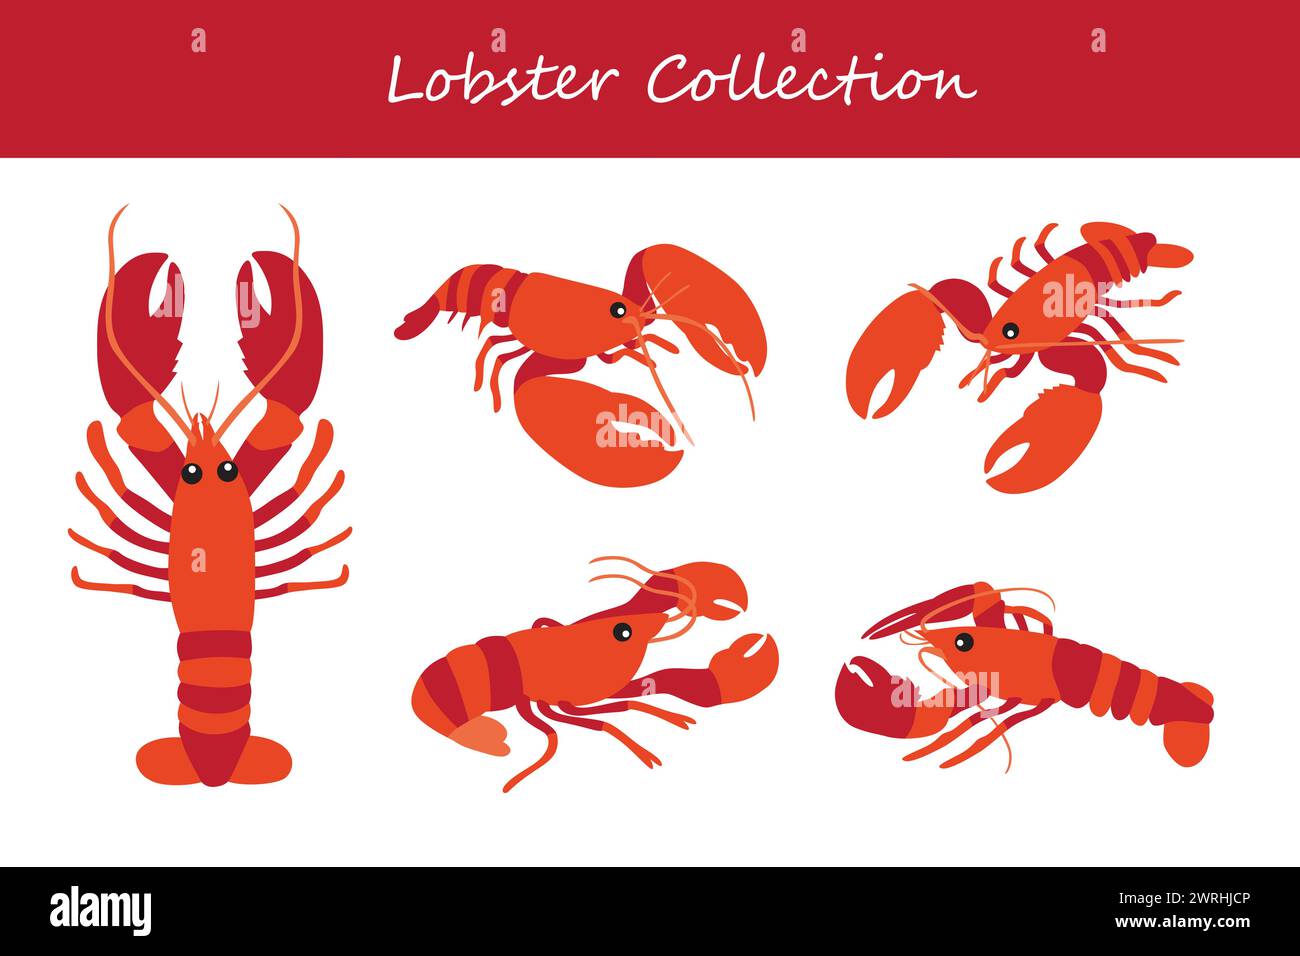 lobster vector illustration set. Cute lobster isolated on white background. Stock Vector